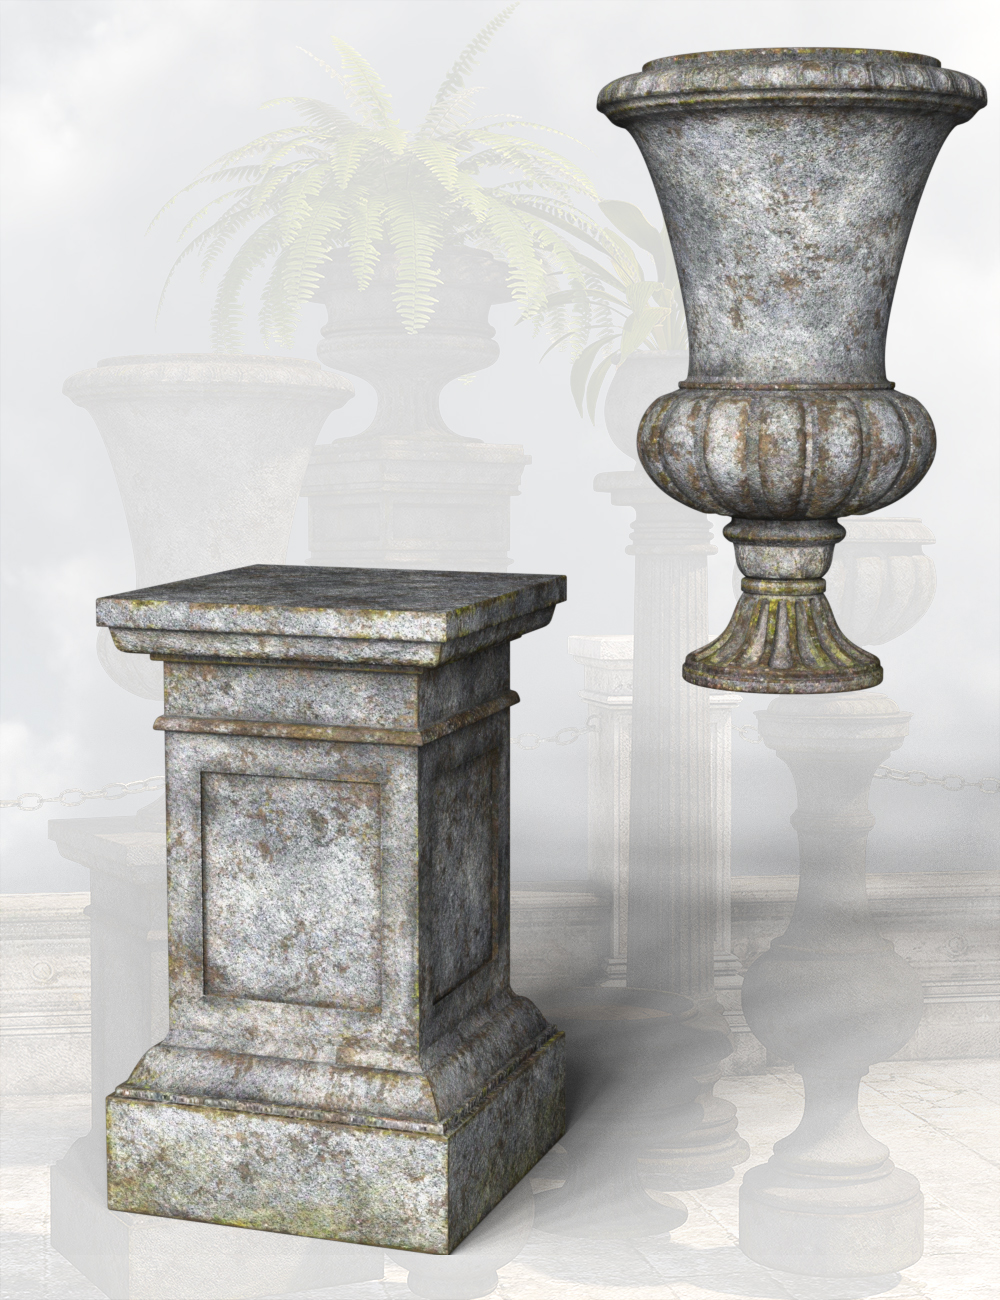 Victorian Garden Decor by: LaurieS, 3D Models by Daz 3D